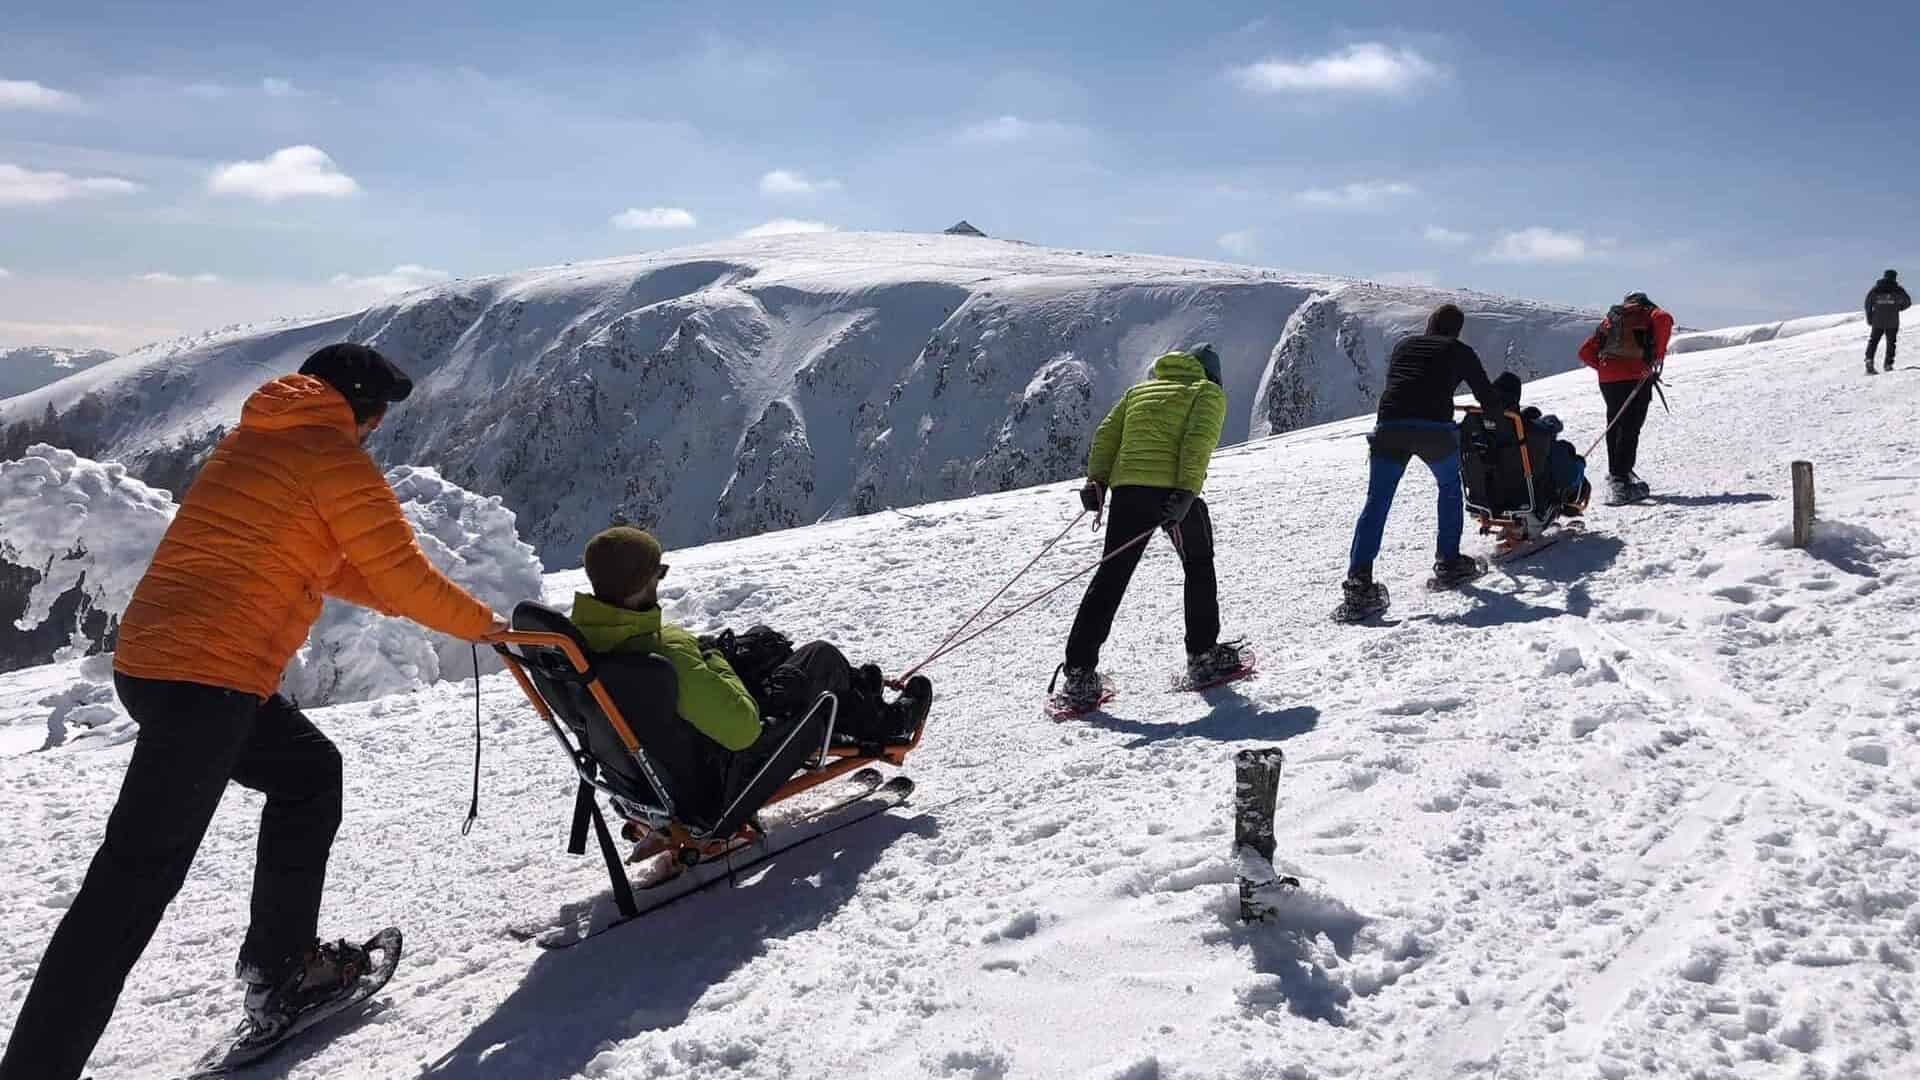 Rescuers help injured hikers in the high mountains in the snow.